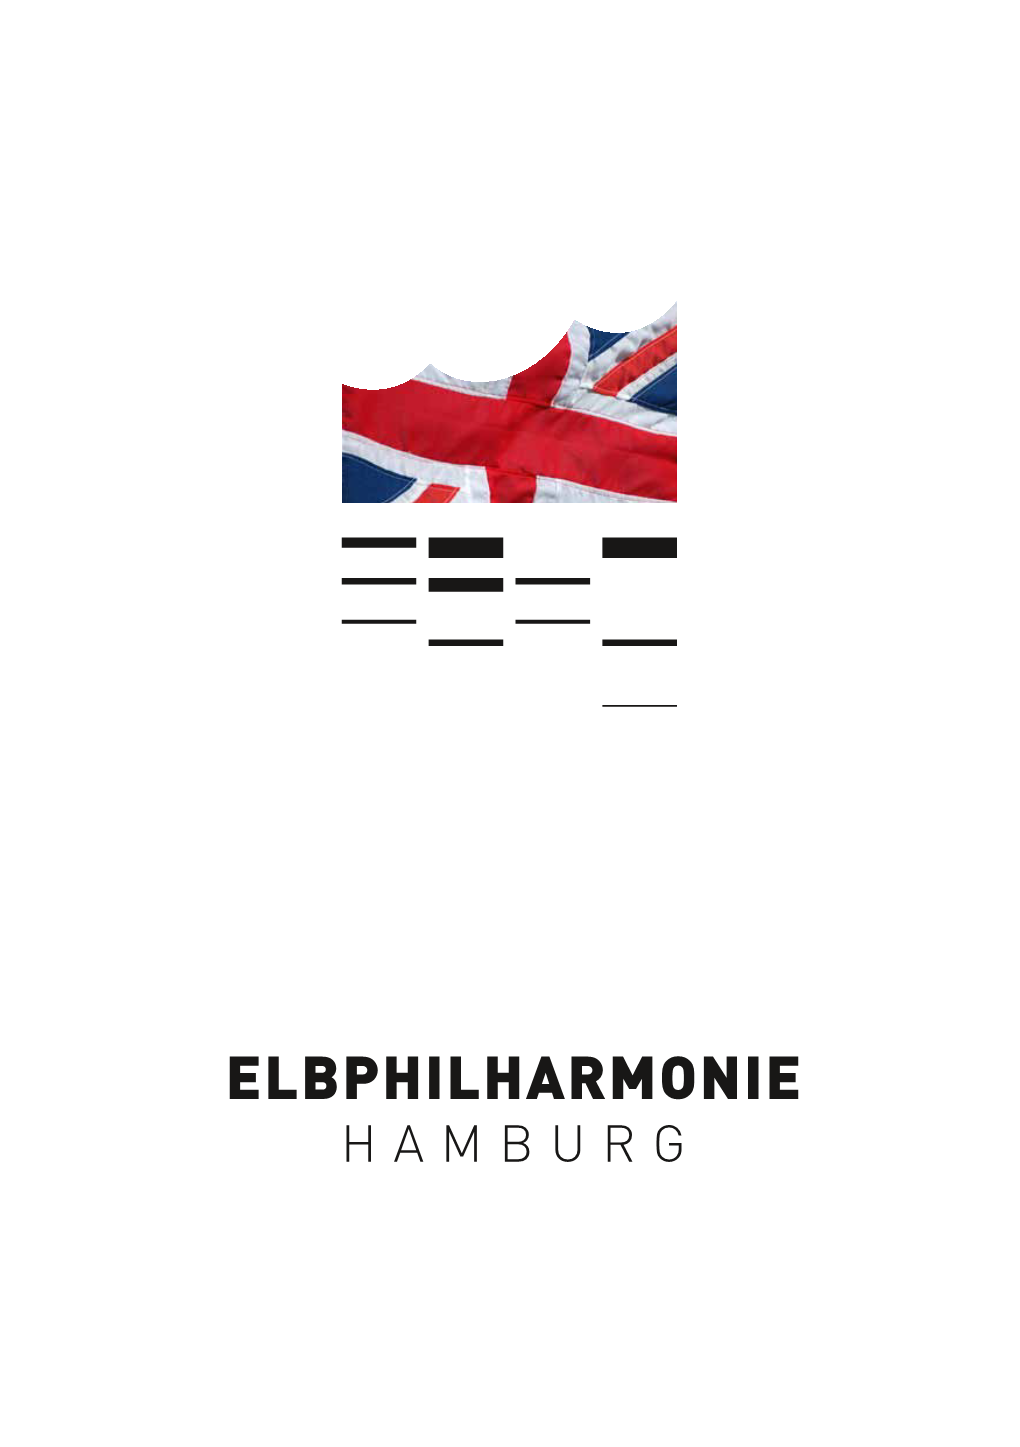 The Elbphilharmonie. More Than Just a Concert Hall